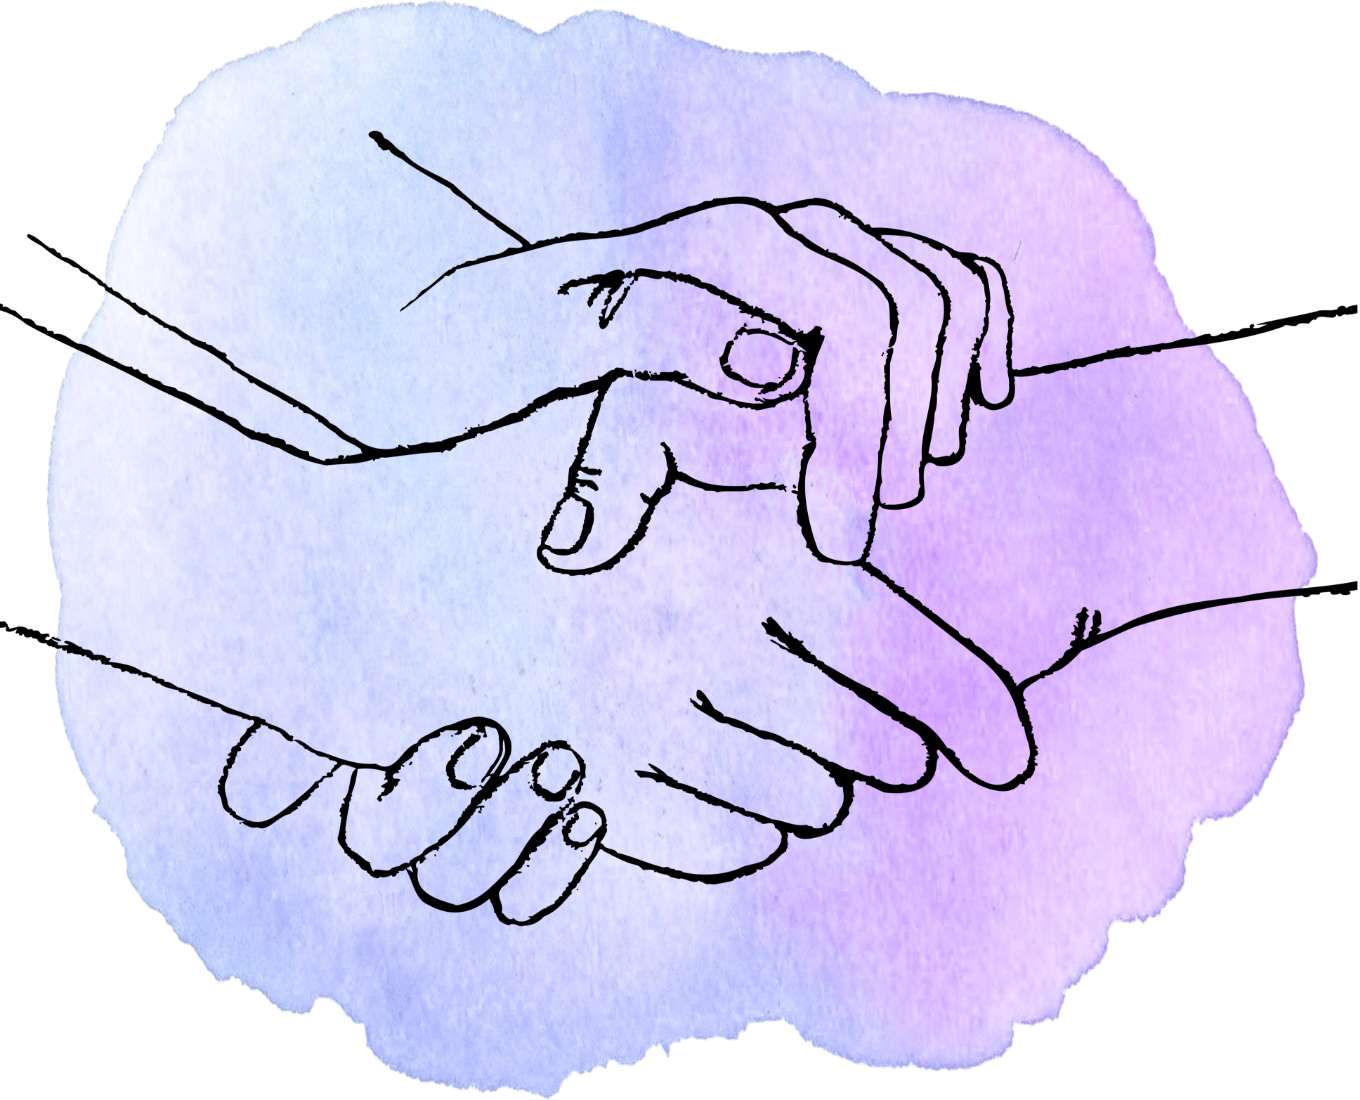 A line drawing of two hands embracing and holding another.